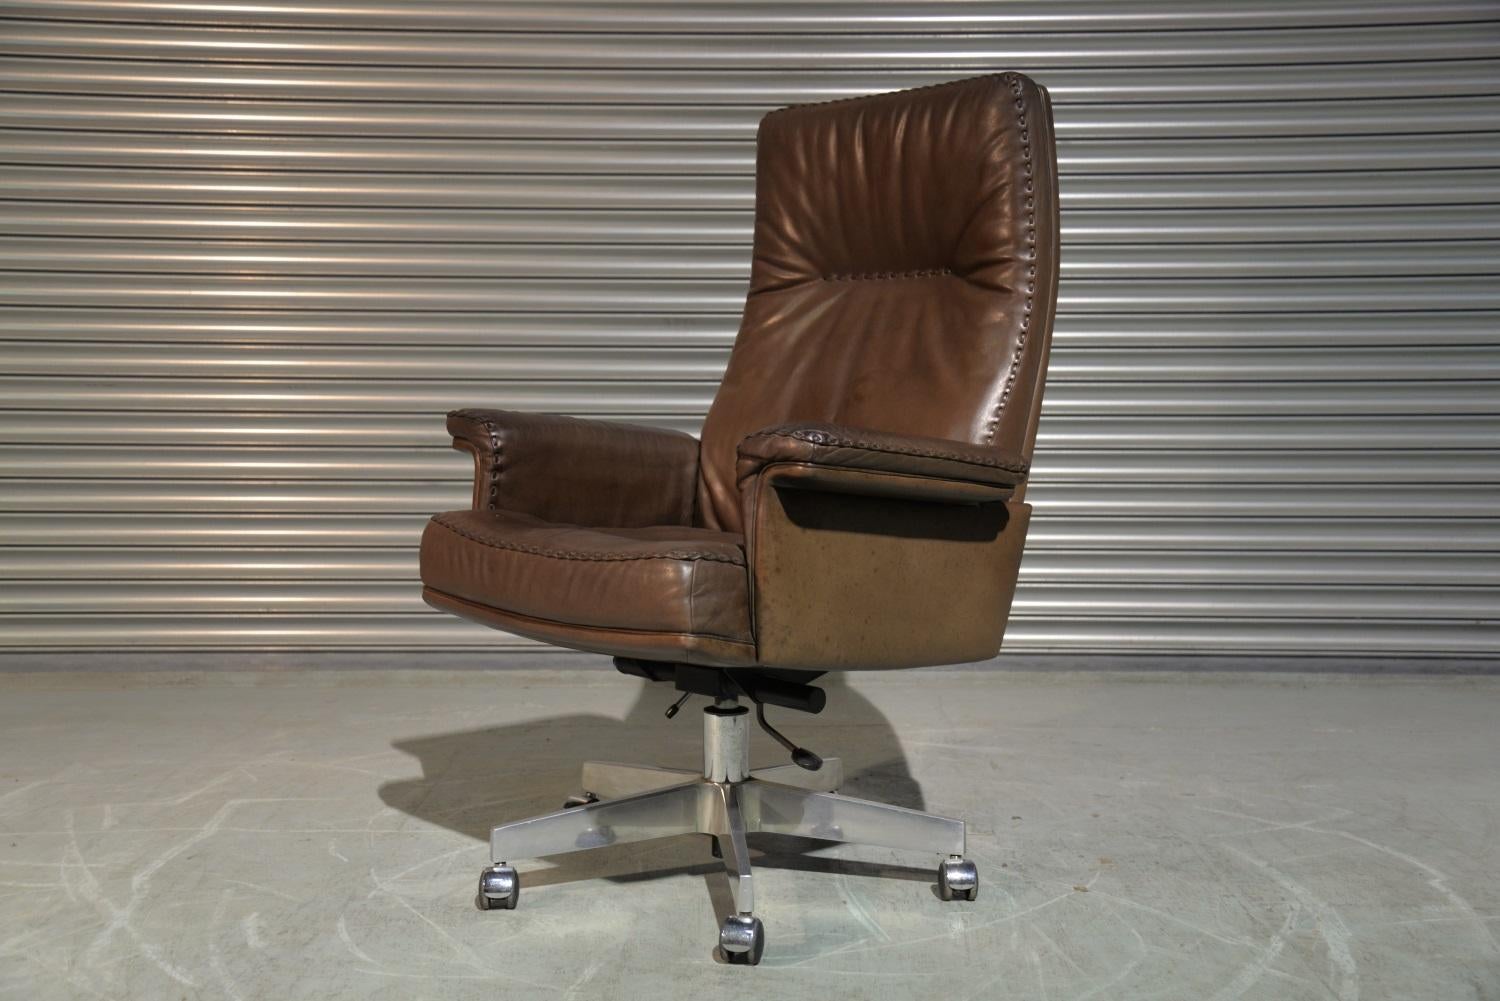 Discounted airfreight for our US and International customers (from 2 weeks door to door)

We are delighted to bring to you an extremely rare vintage De Sede DS 35 Executive armchair on casters. Built to incredibly high standards by De Sede craftsman